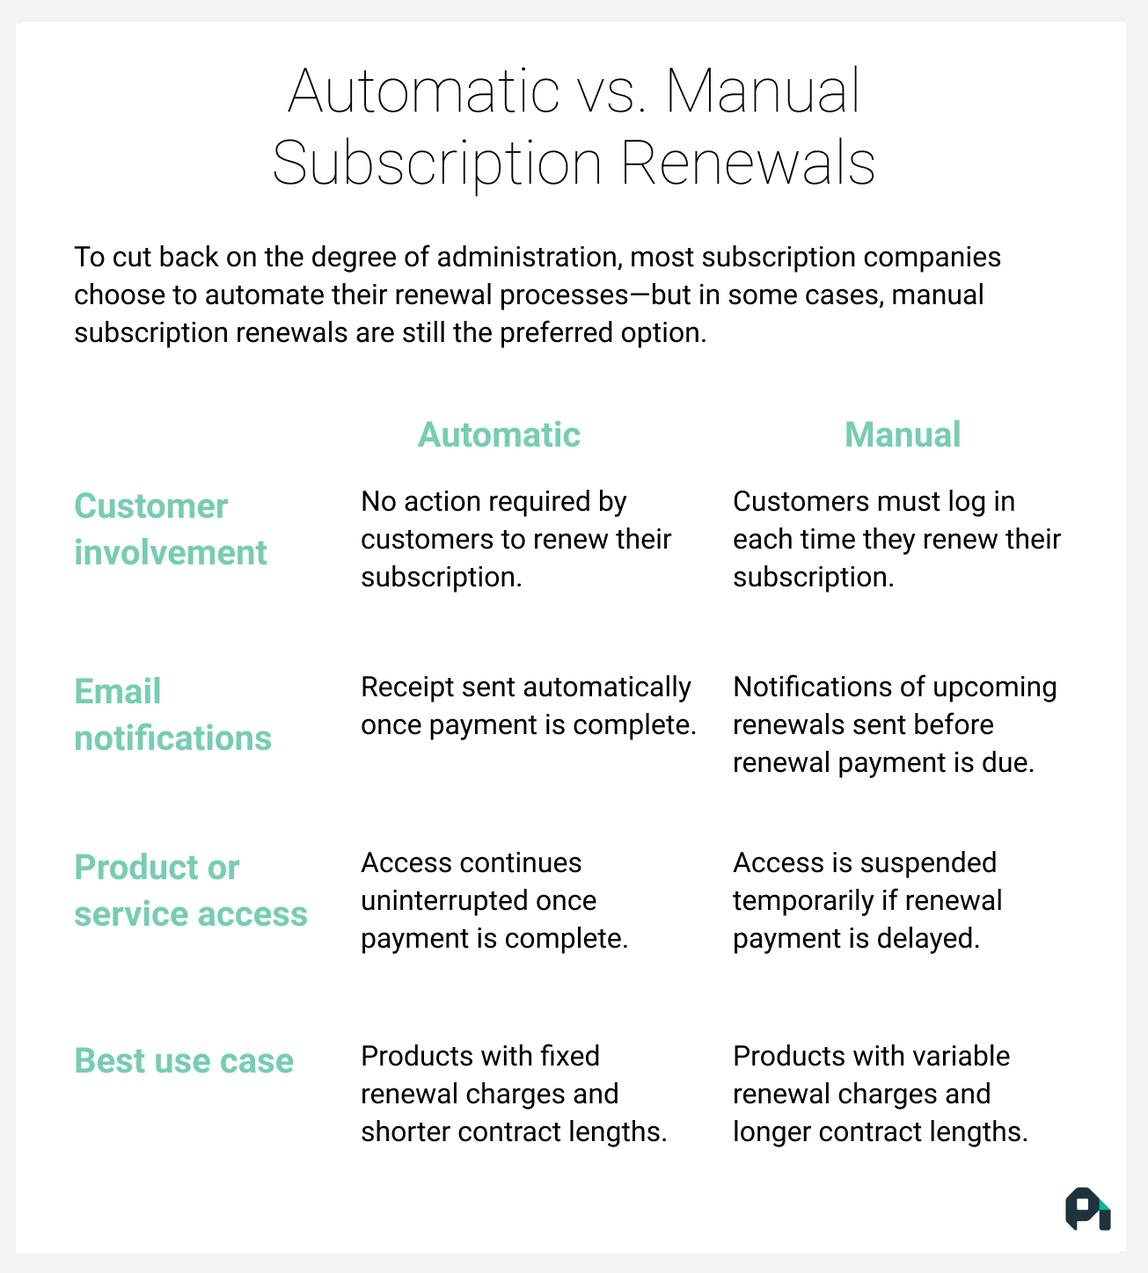 Summary of the differences between automatic and manual subscription renewals